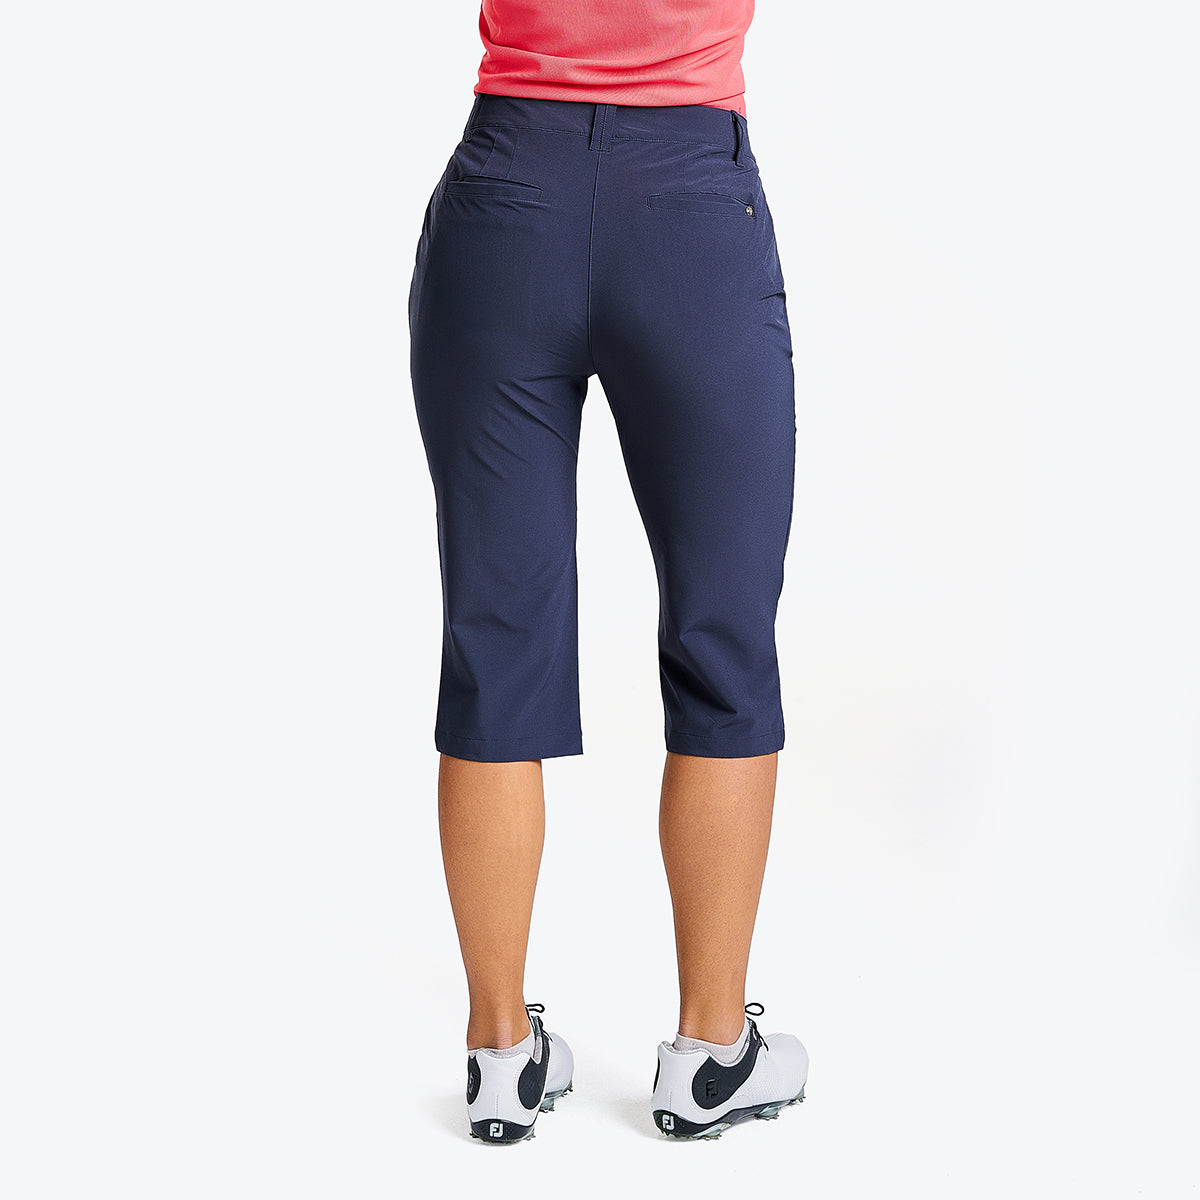 Nivo Ladies Straight Cut Pedal Pushers in Navy